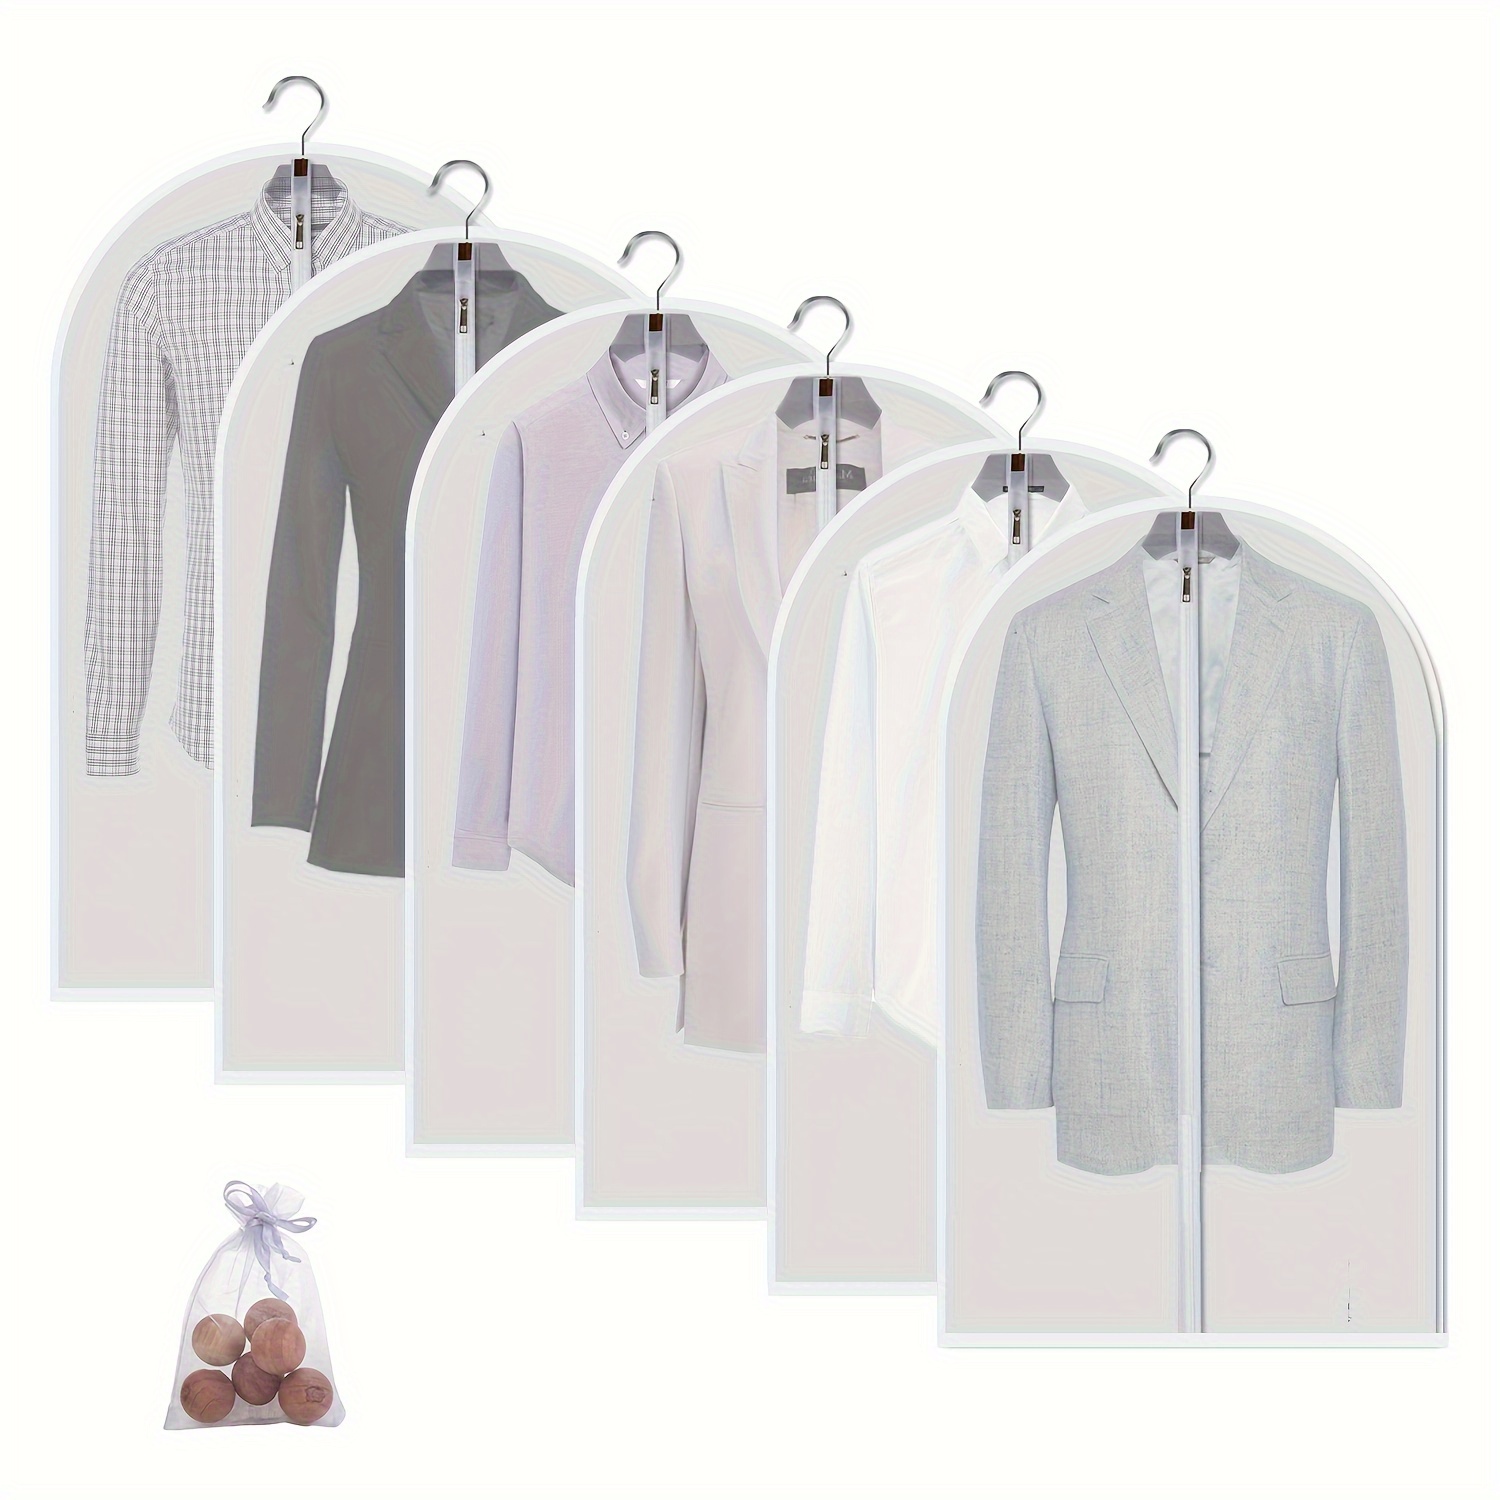 

6 Pcs 40" Clear Garment Bags Clothes Covers Protecting Dusts For Storage Plastic Garment Bags Hanging Clothes Bags Dress Bag For Gowns Long With Zipper For Closet